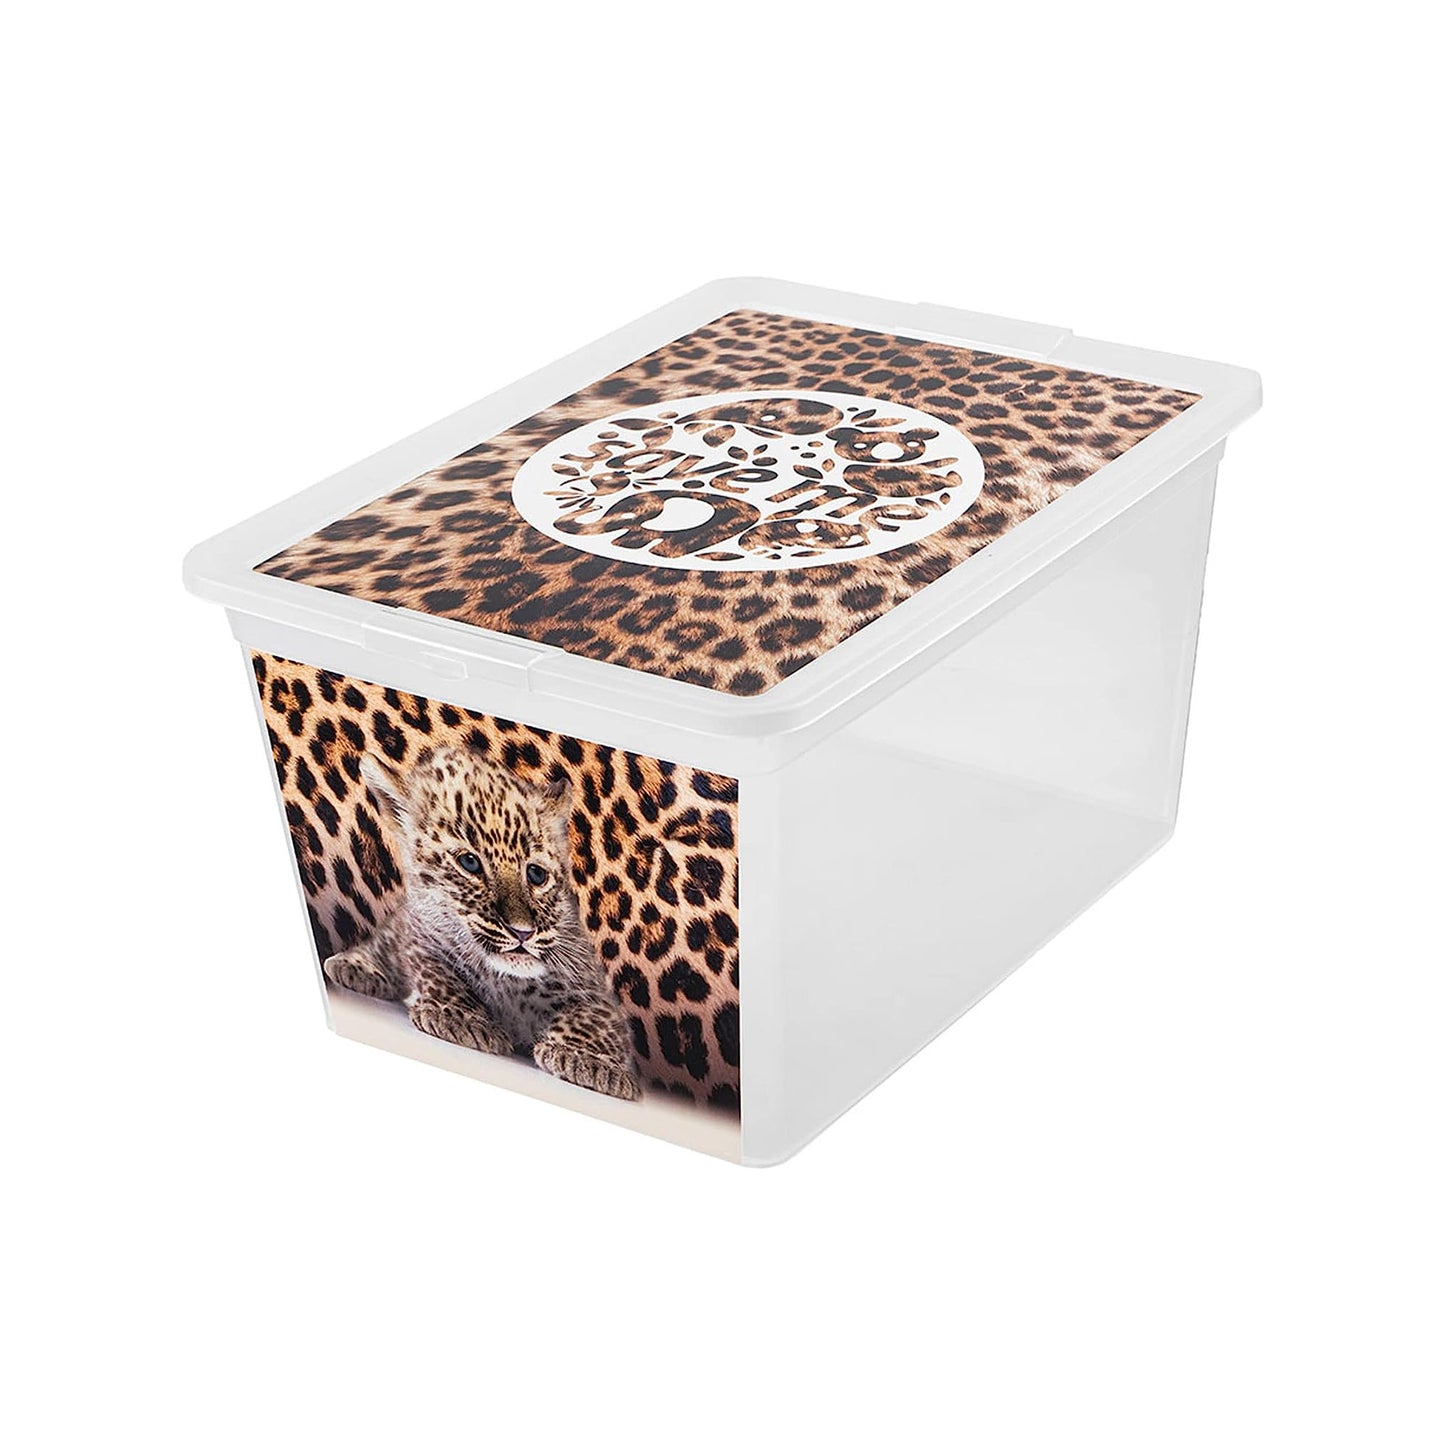 30 Litre Printed Animal Save Me Boxes Strong Stackable Storage Containers With Lids